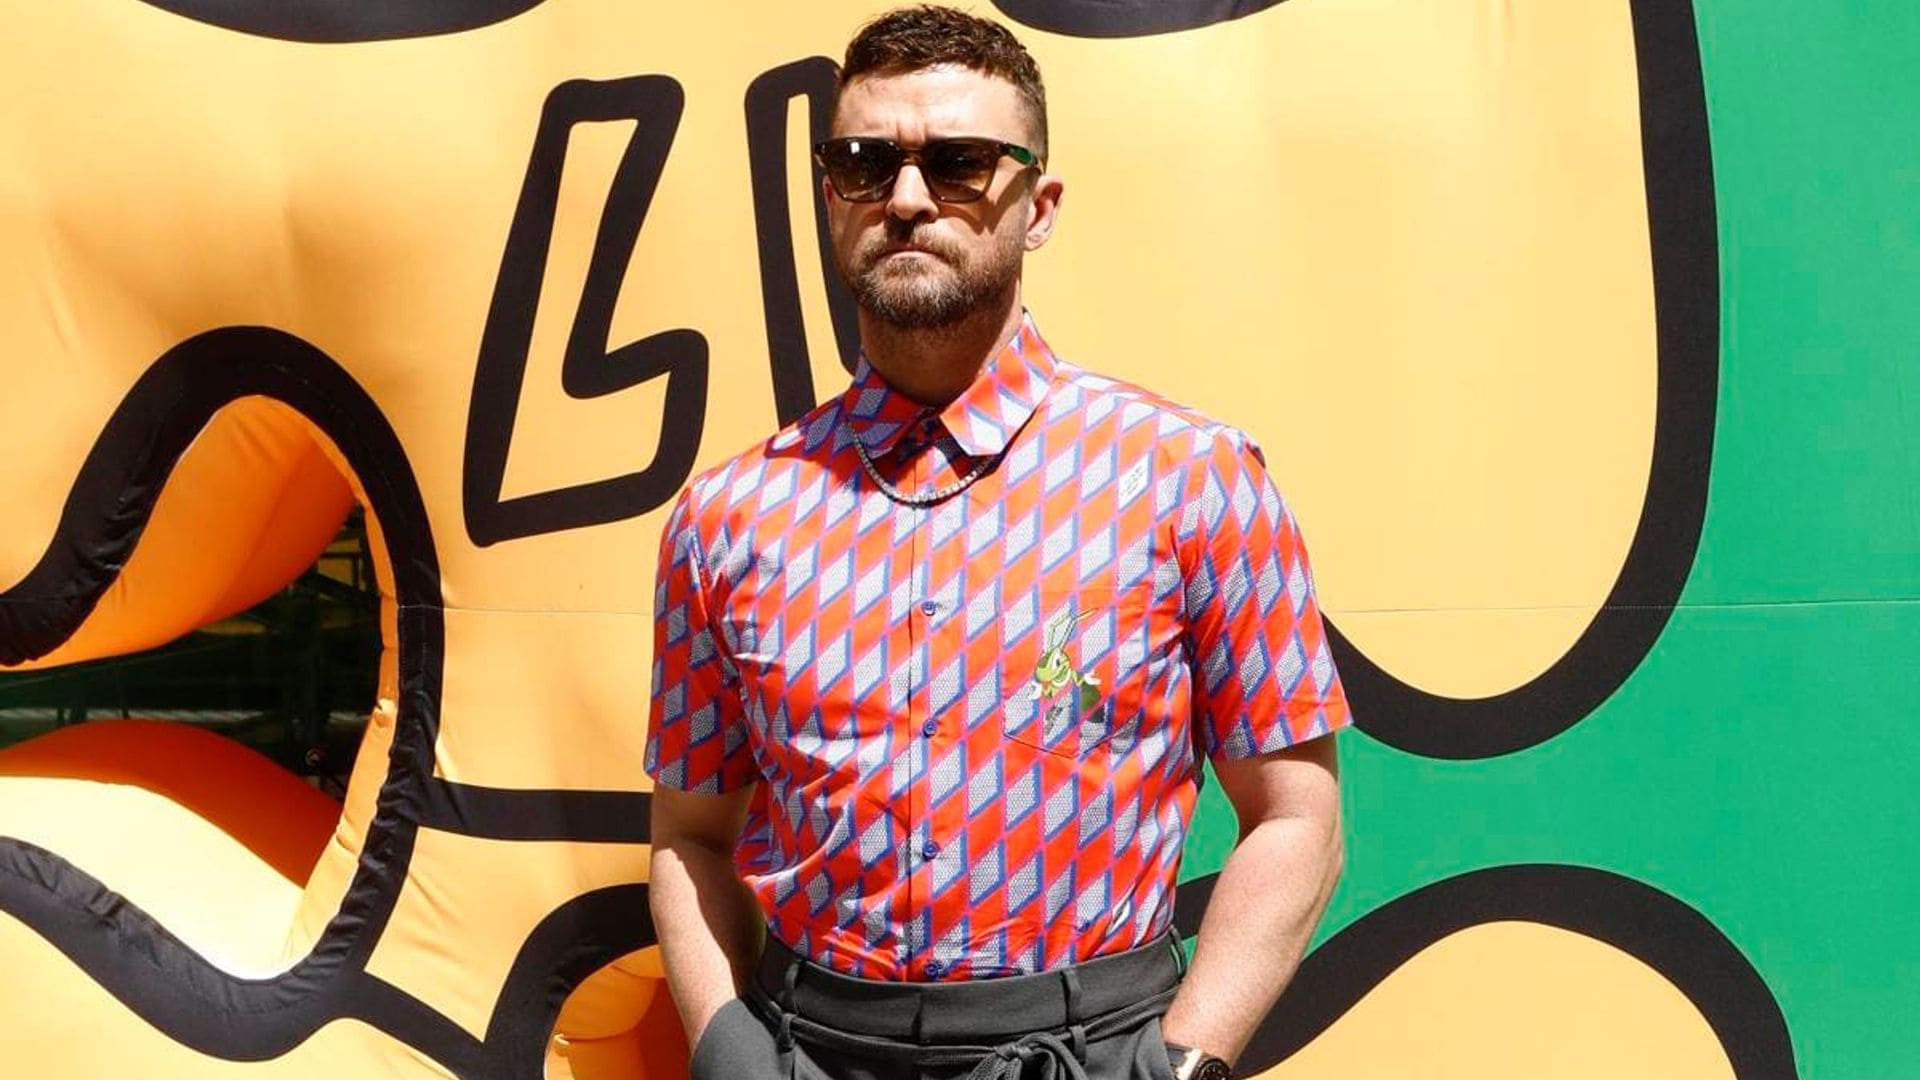 Justin Timberlake blames his feet for his embarrassing dance video that went viral